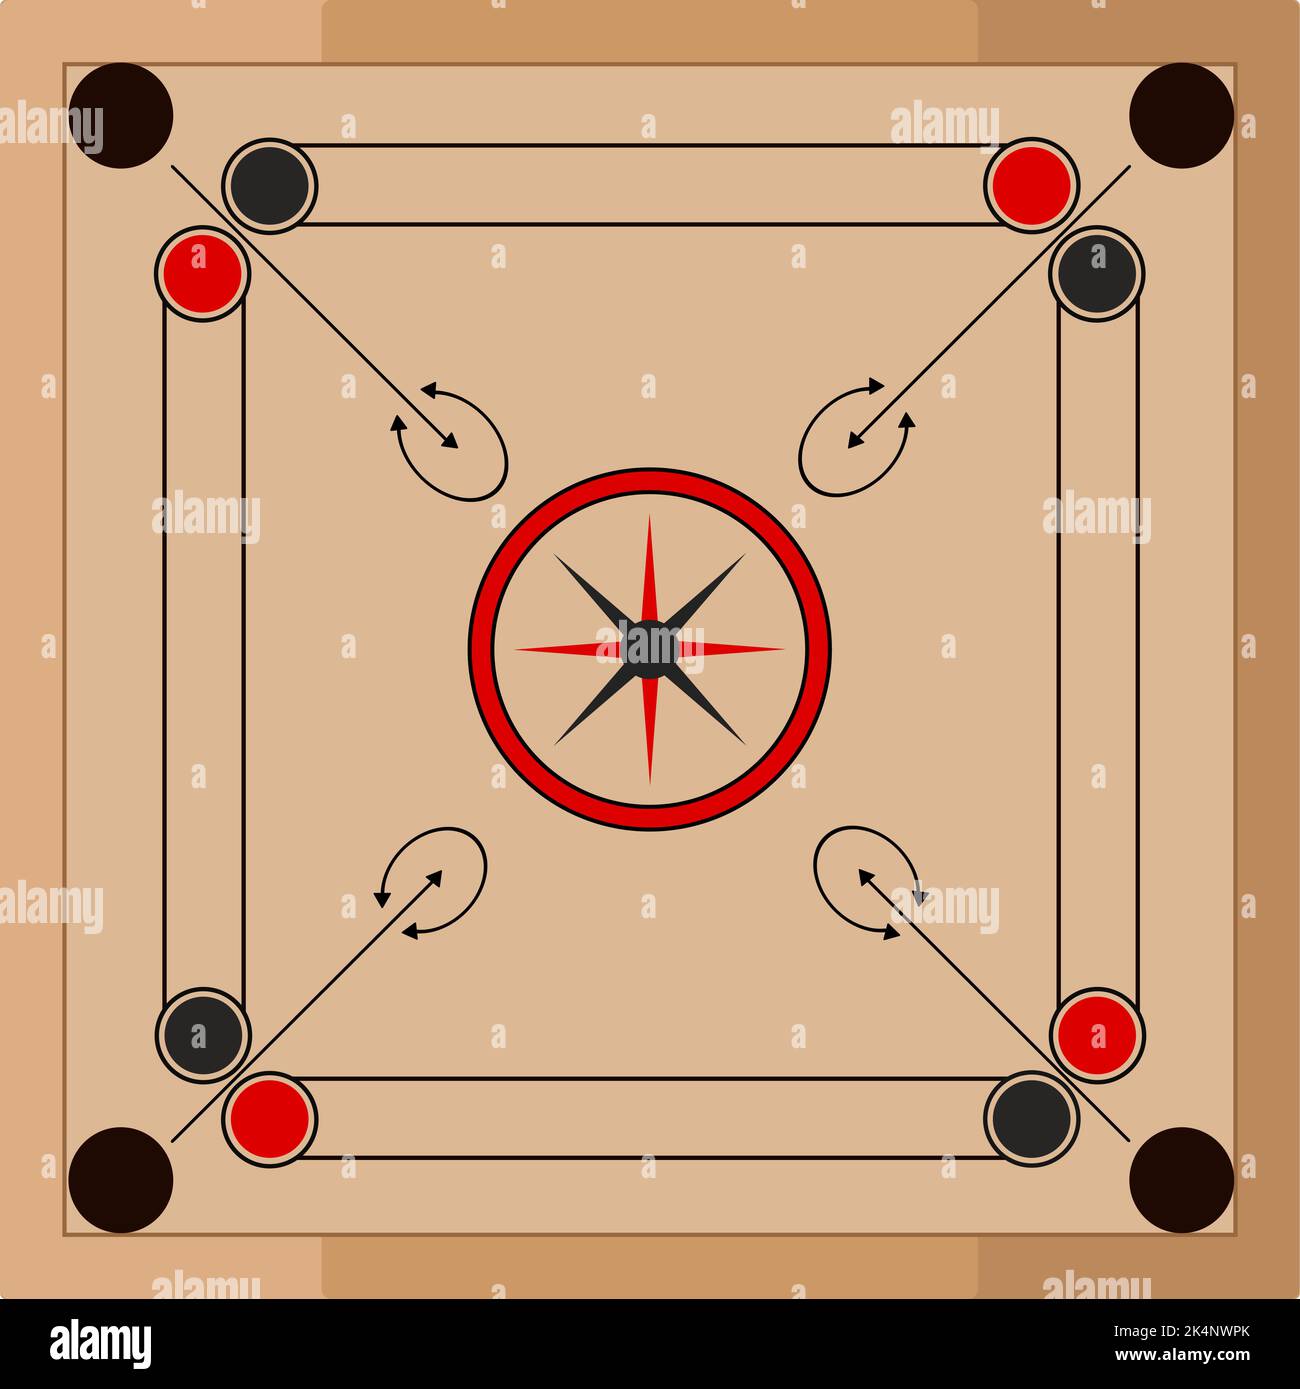 Carrom Board Canvas Print by The Paintly Store  LARGE  Carrom board  Canvas prints Wall art canvas prints